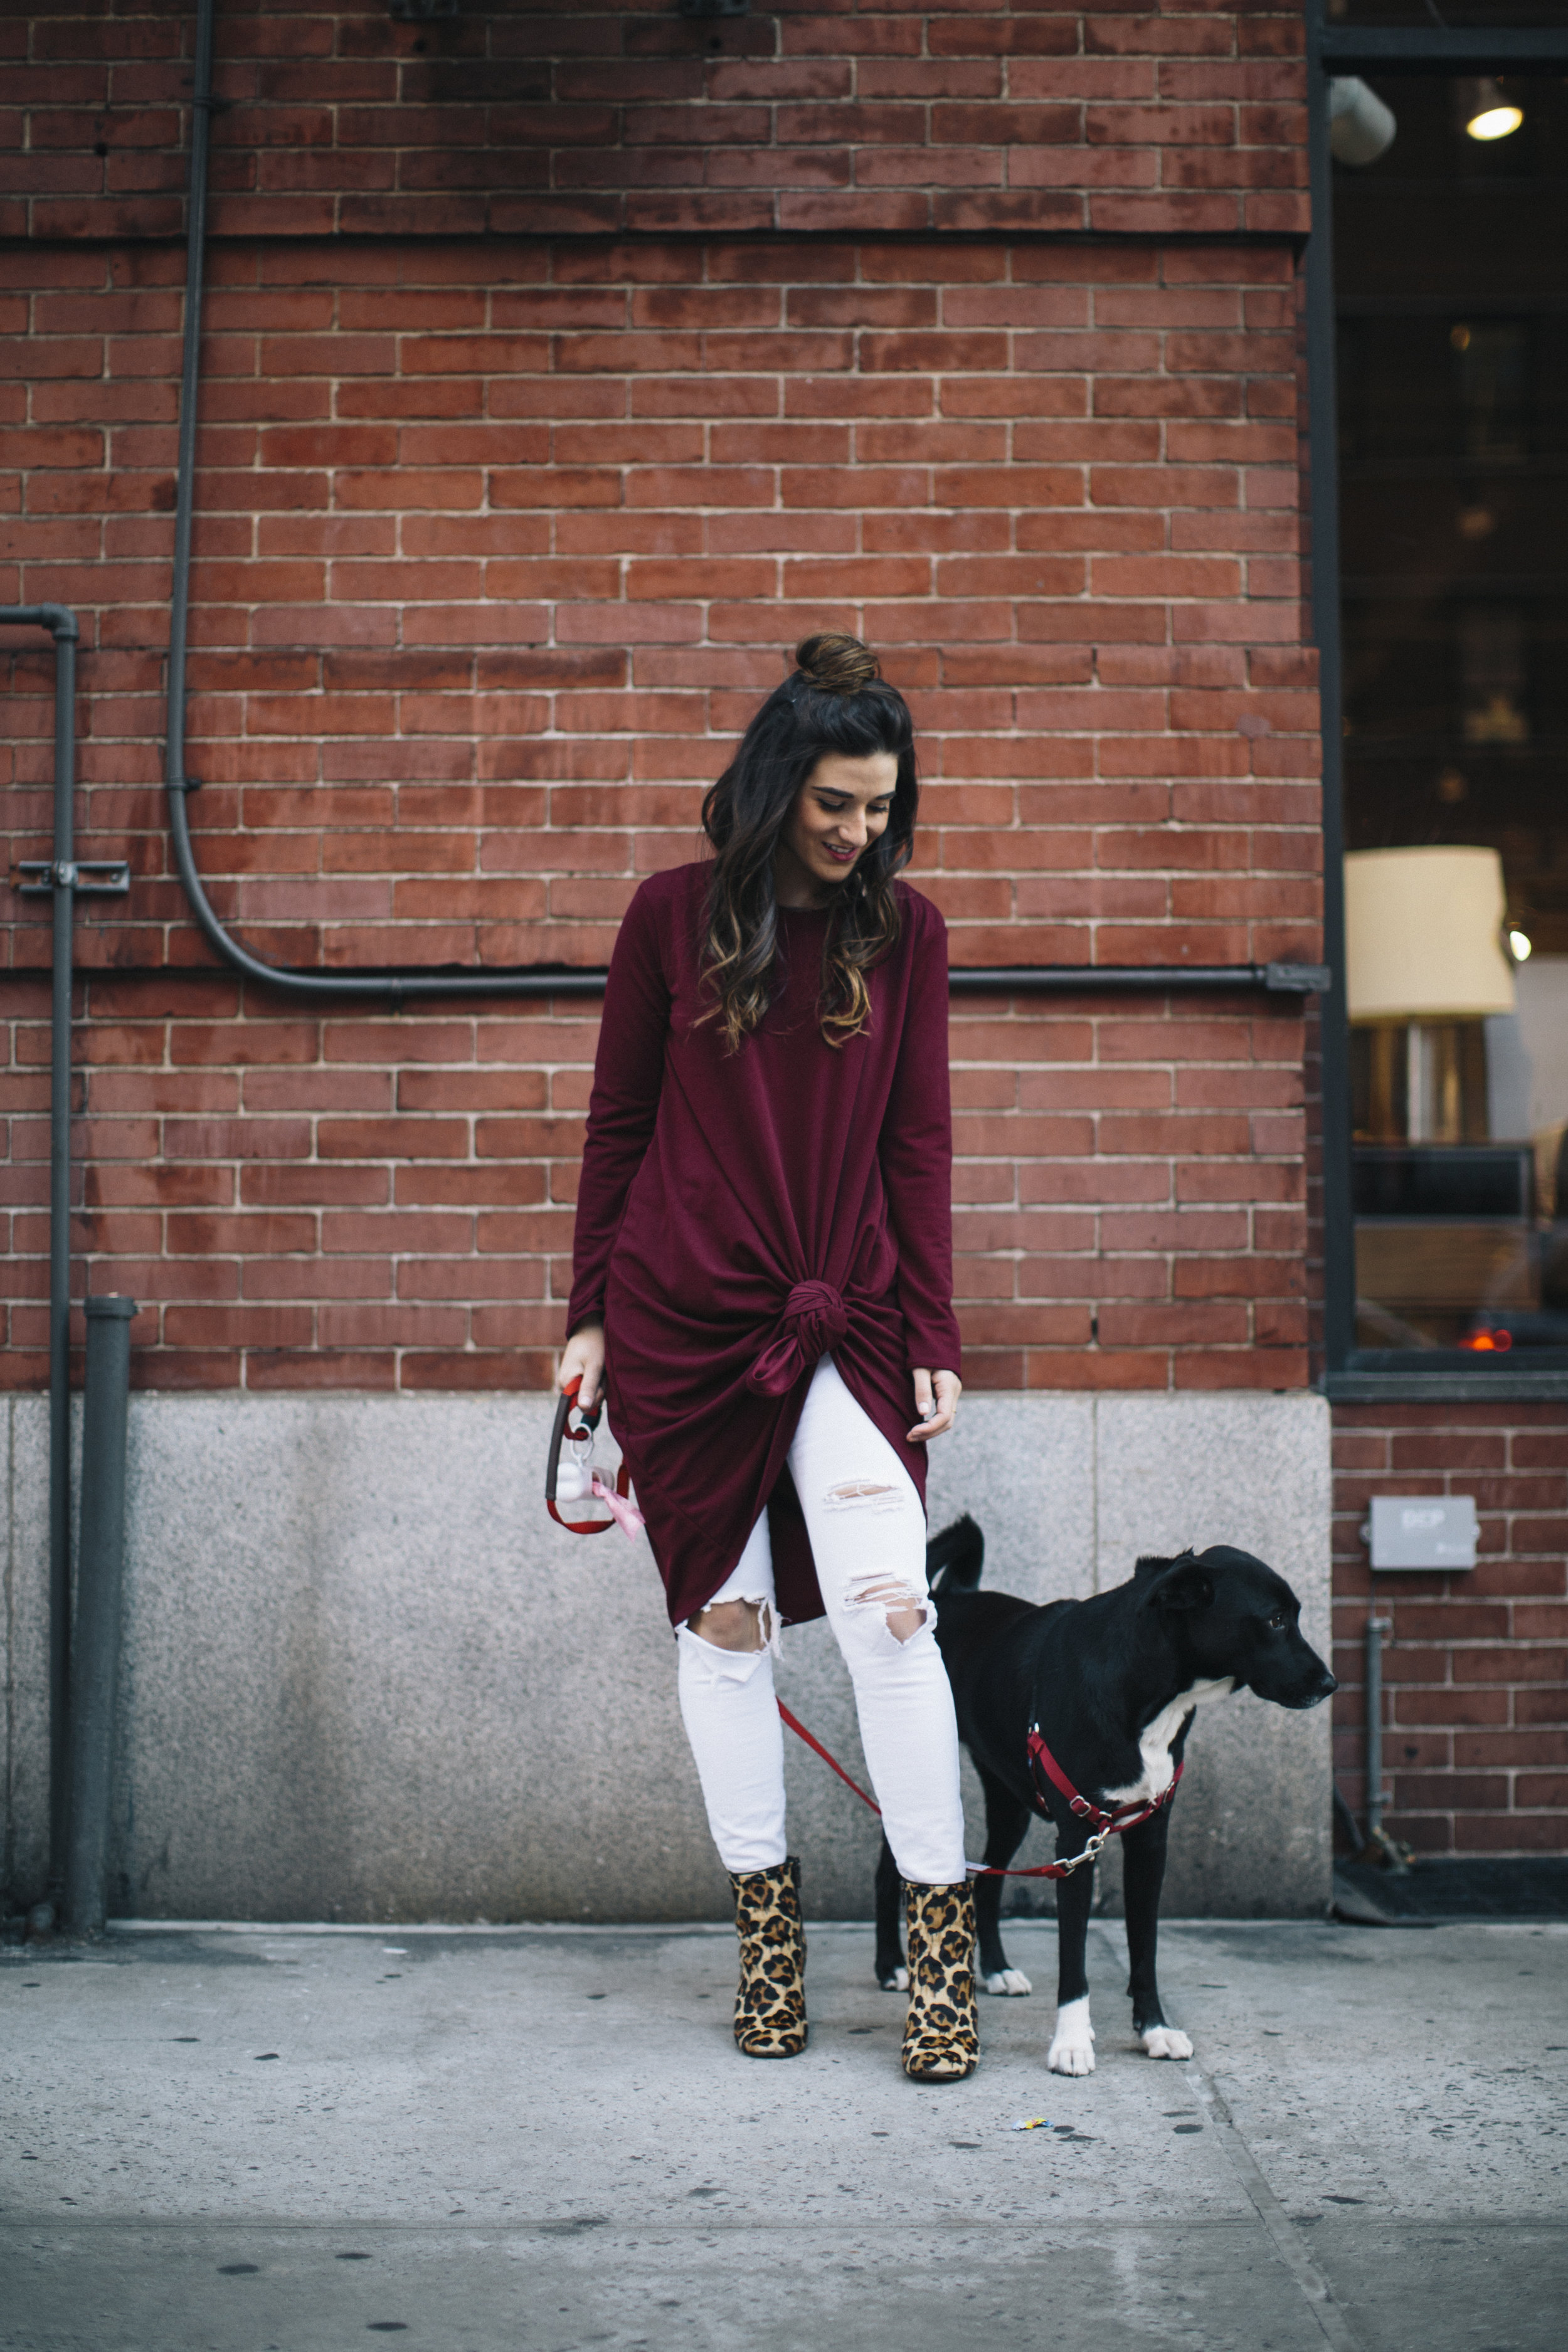 Knotted Dress + Ripped White Jeans 4 Ways To Build Connections Louboutins & Love Fashion Blog Esther Santer NYC Street Style Blogger Outfit OOTD Trendy Red Maroon Burgundy Winter Color Leopard Coach Booties Pants Girl Women Bun Topknot Hair Shoes Wear.jpg